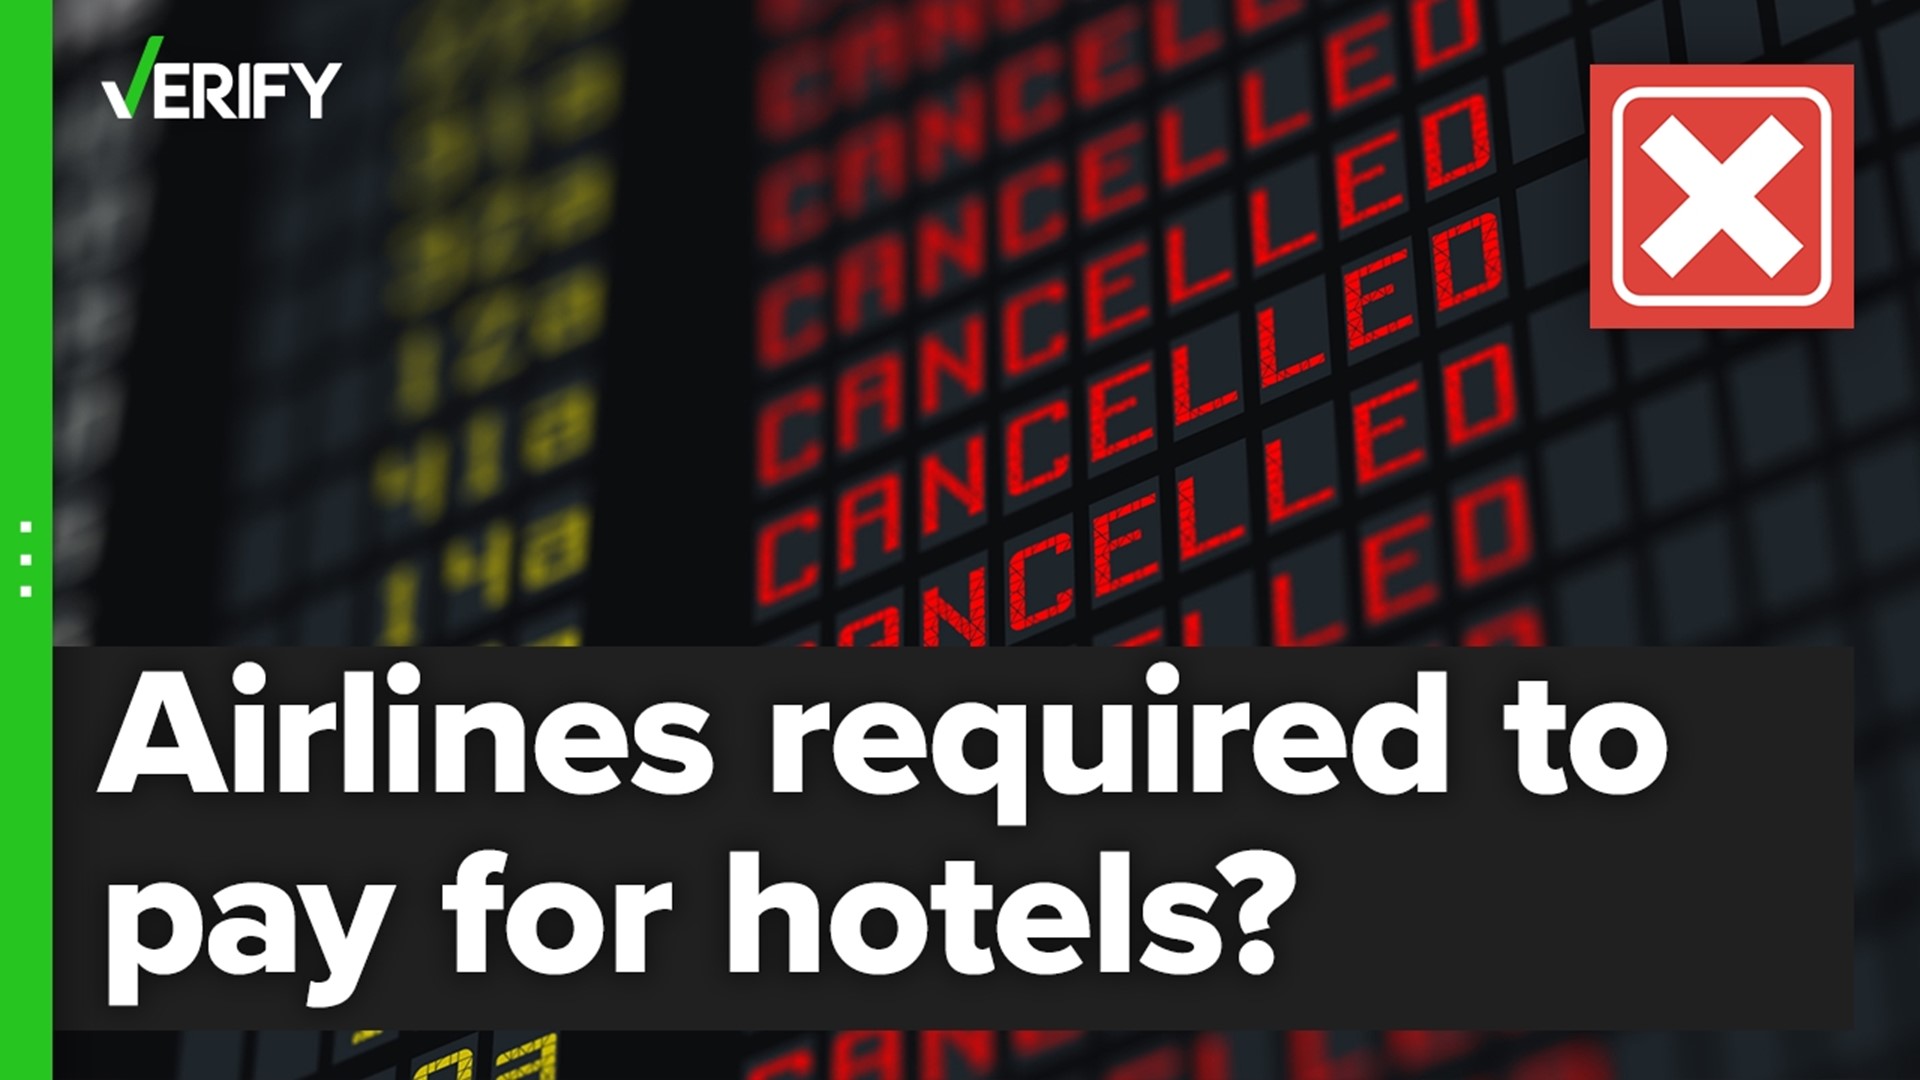 Southwest and other airlines aren’t required by law to pay for hotels and meals amid canceled flights, but many have policies in place to do so.